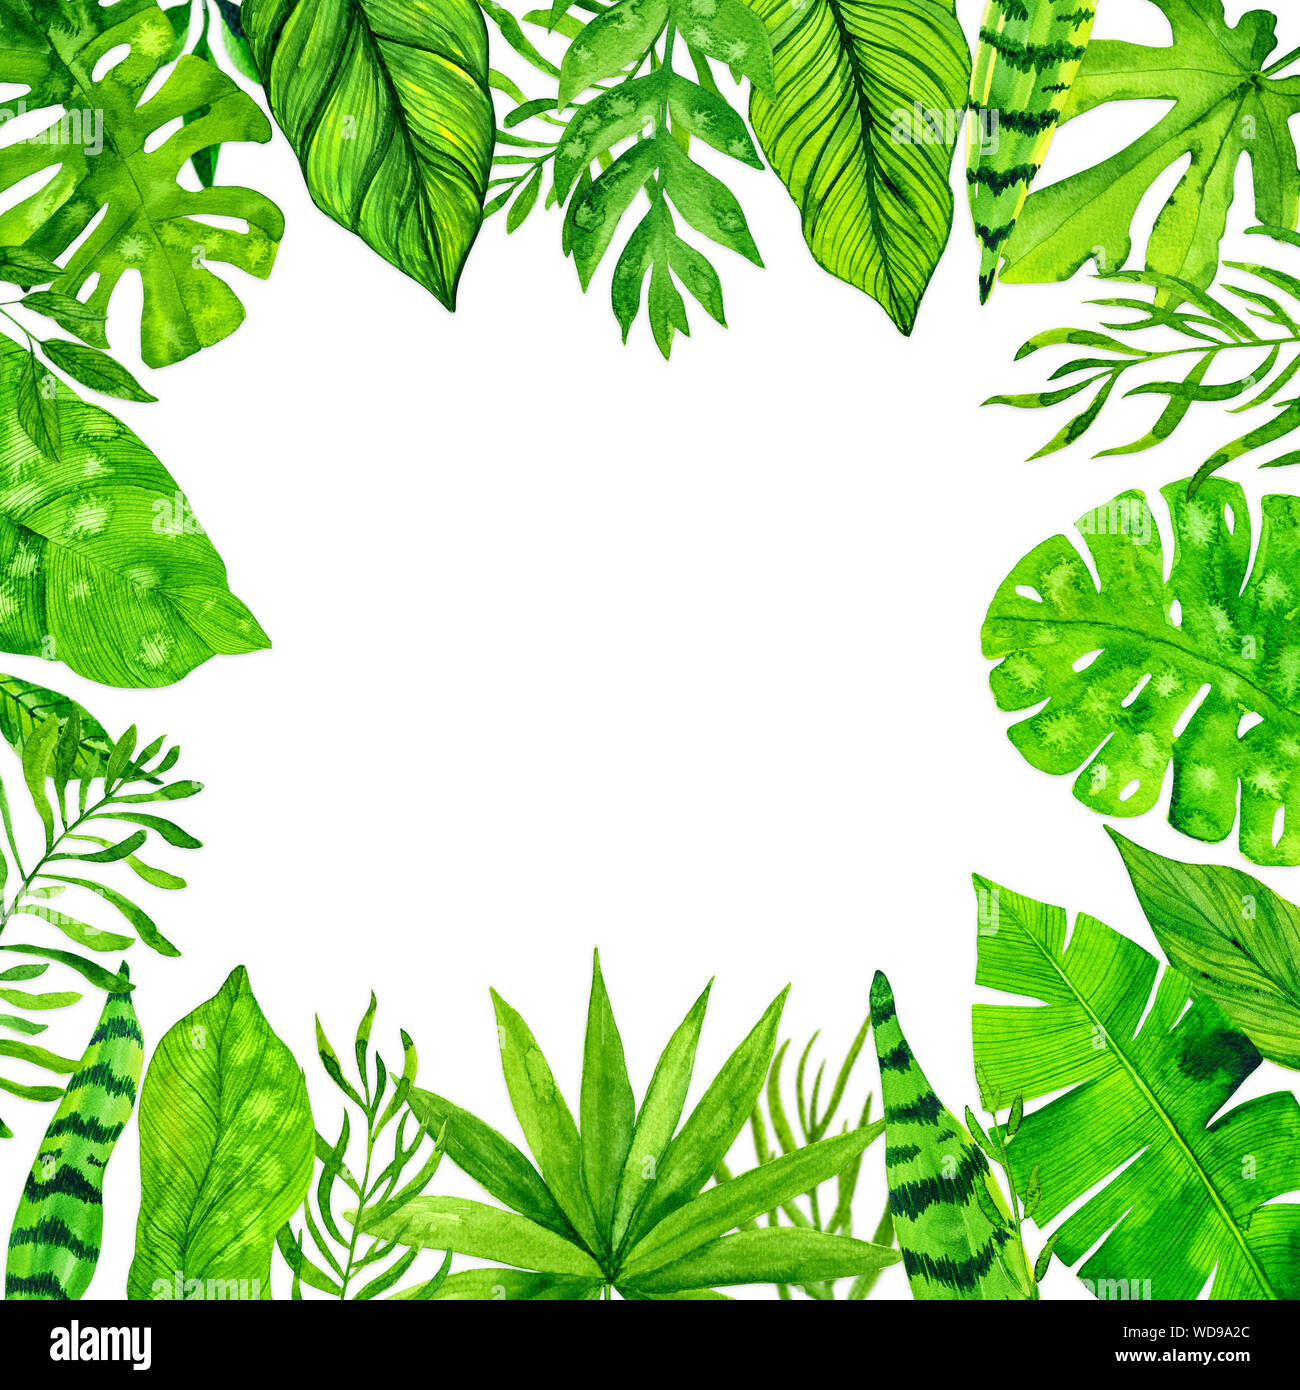 Tropical exotic leaves frame on white background. Watercolor illustration Stock Photo